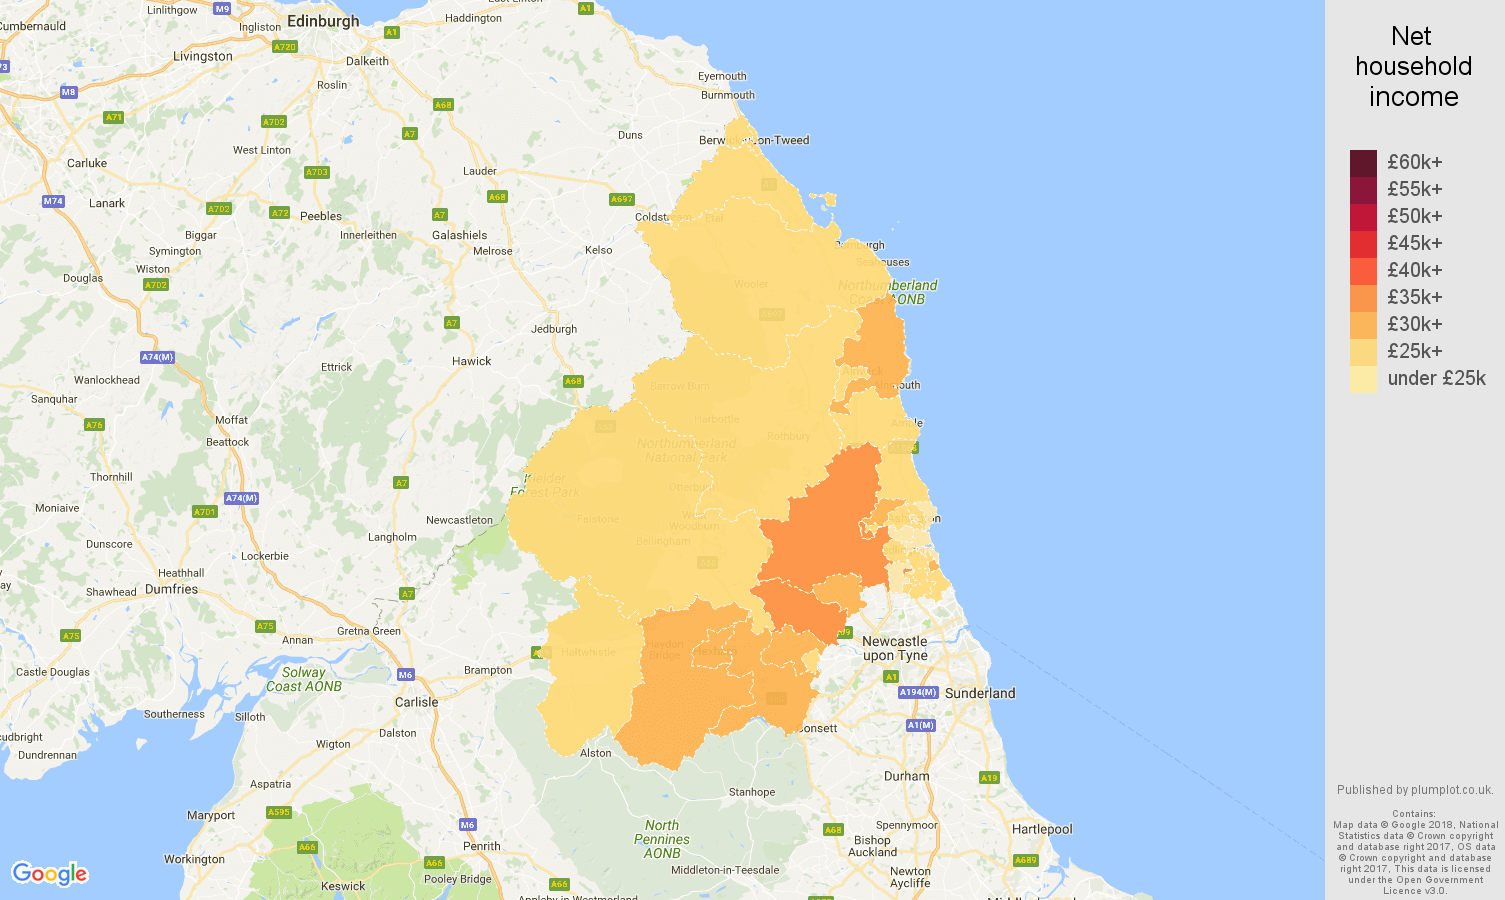 Northumberland net household income map